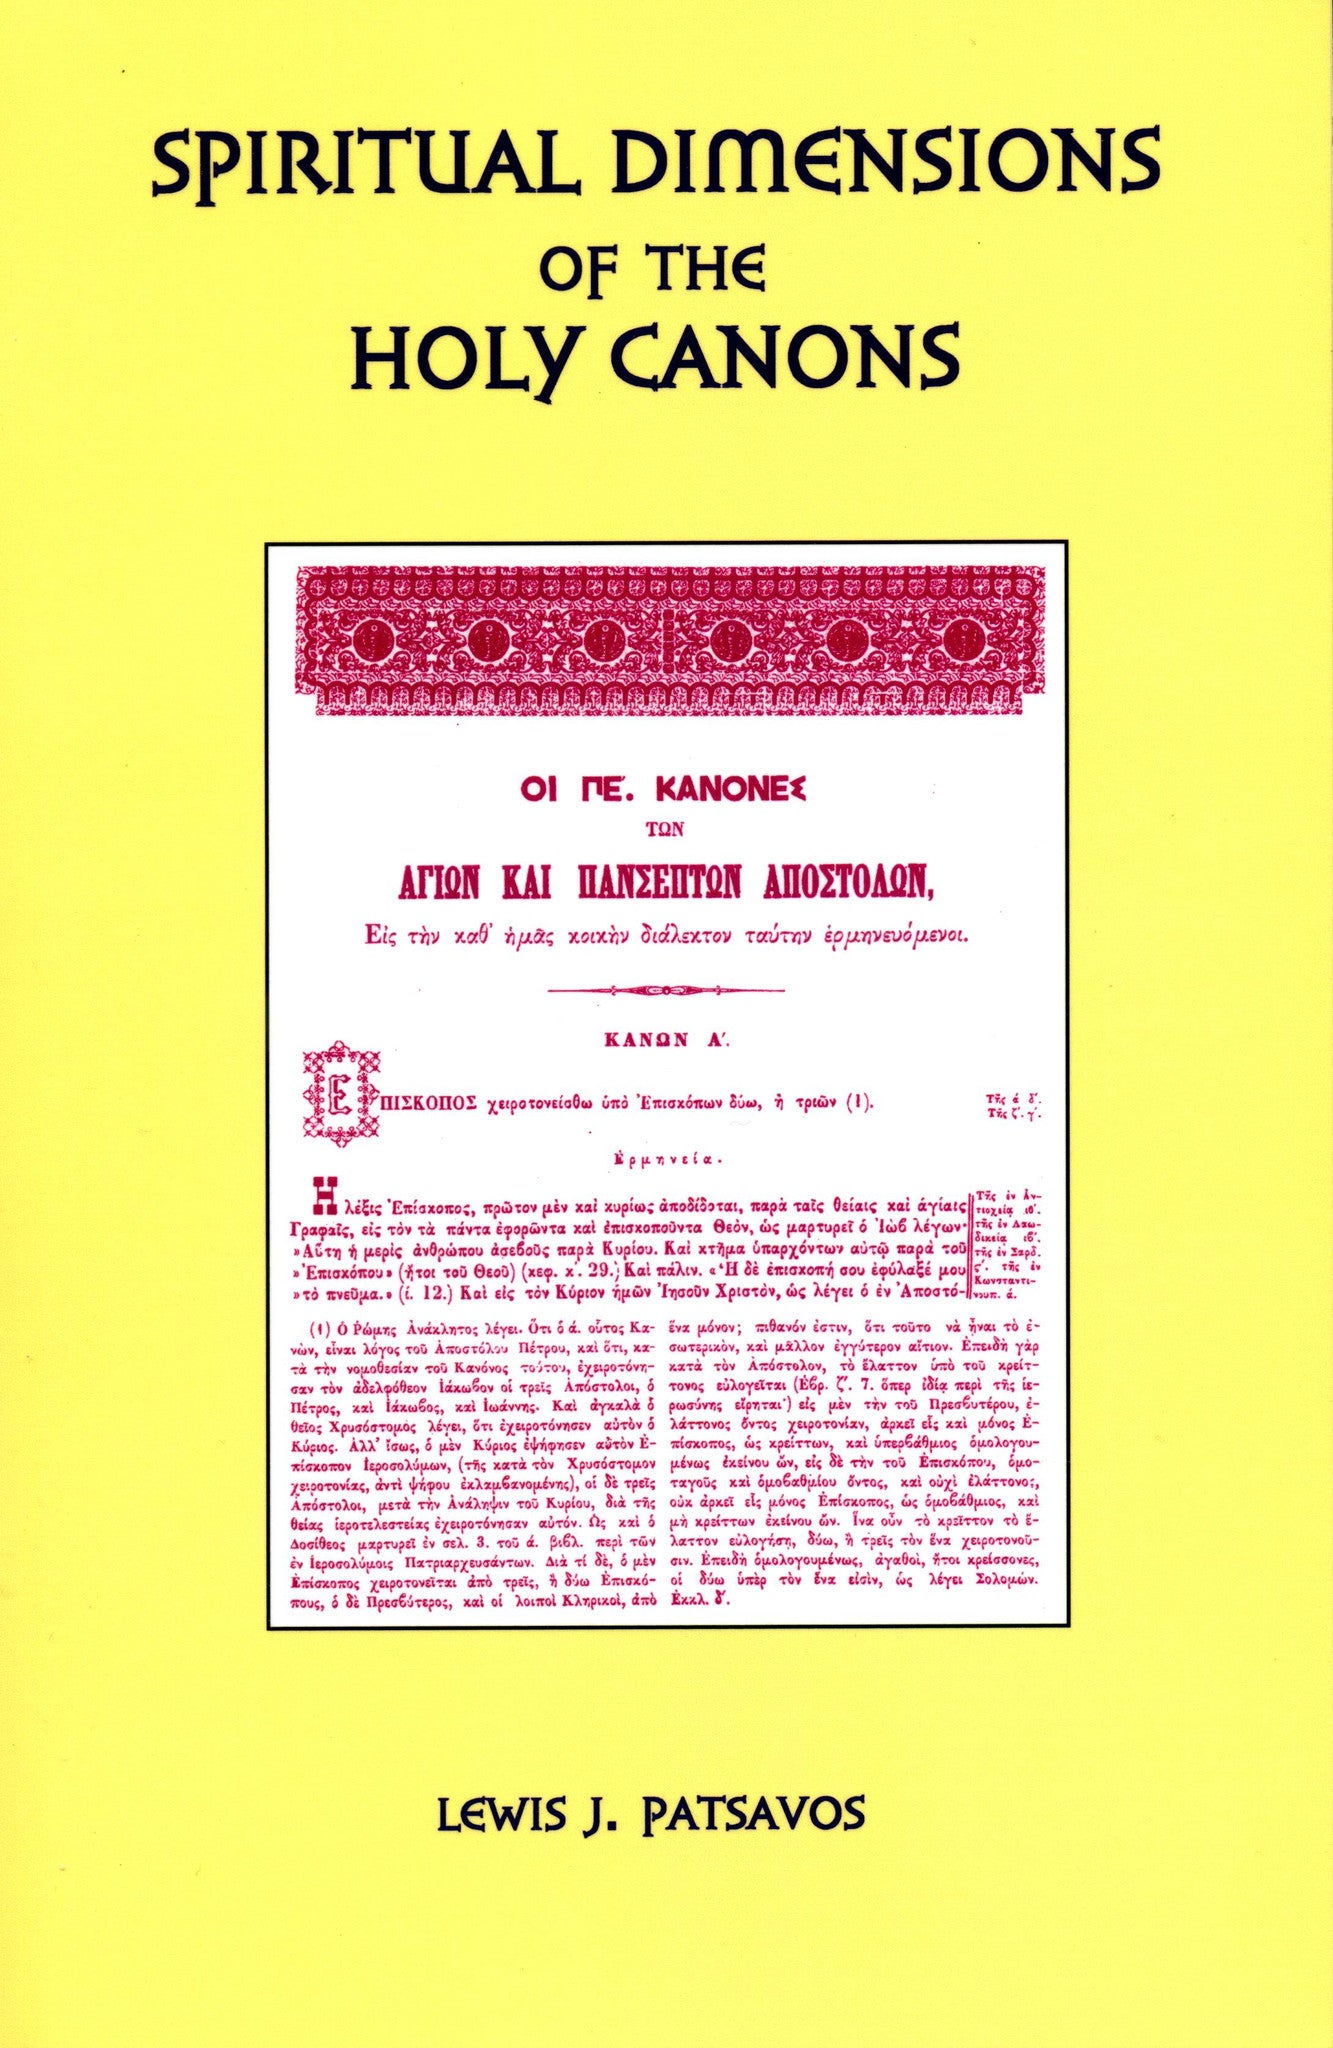 Spiritual Dimensions of the the Holy Canons